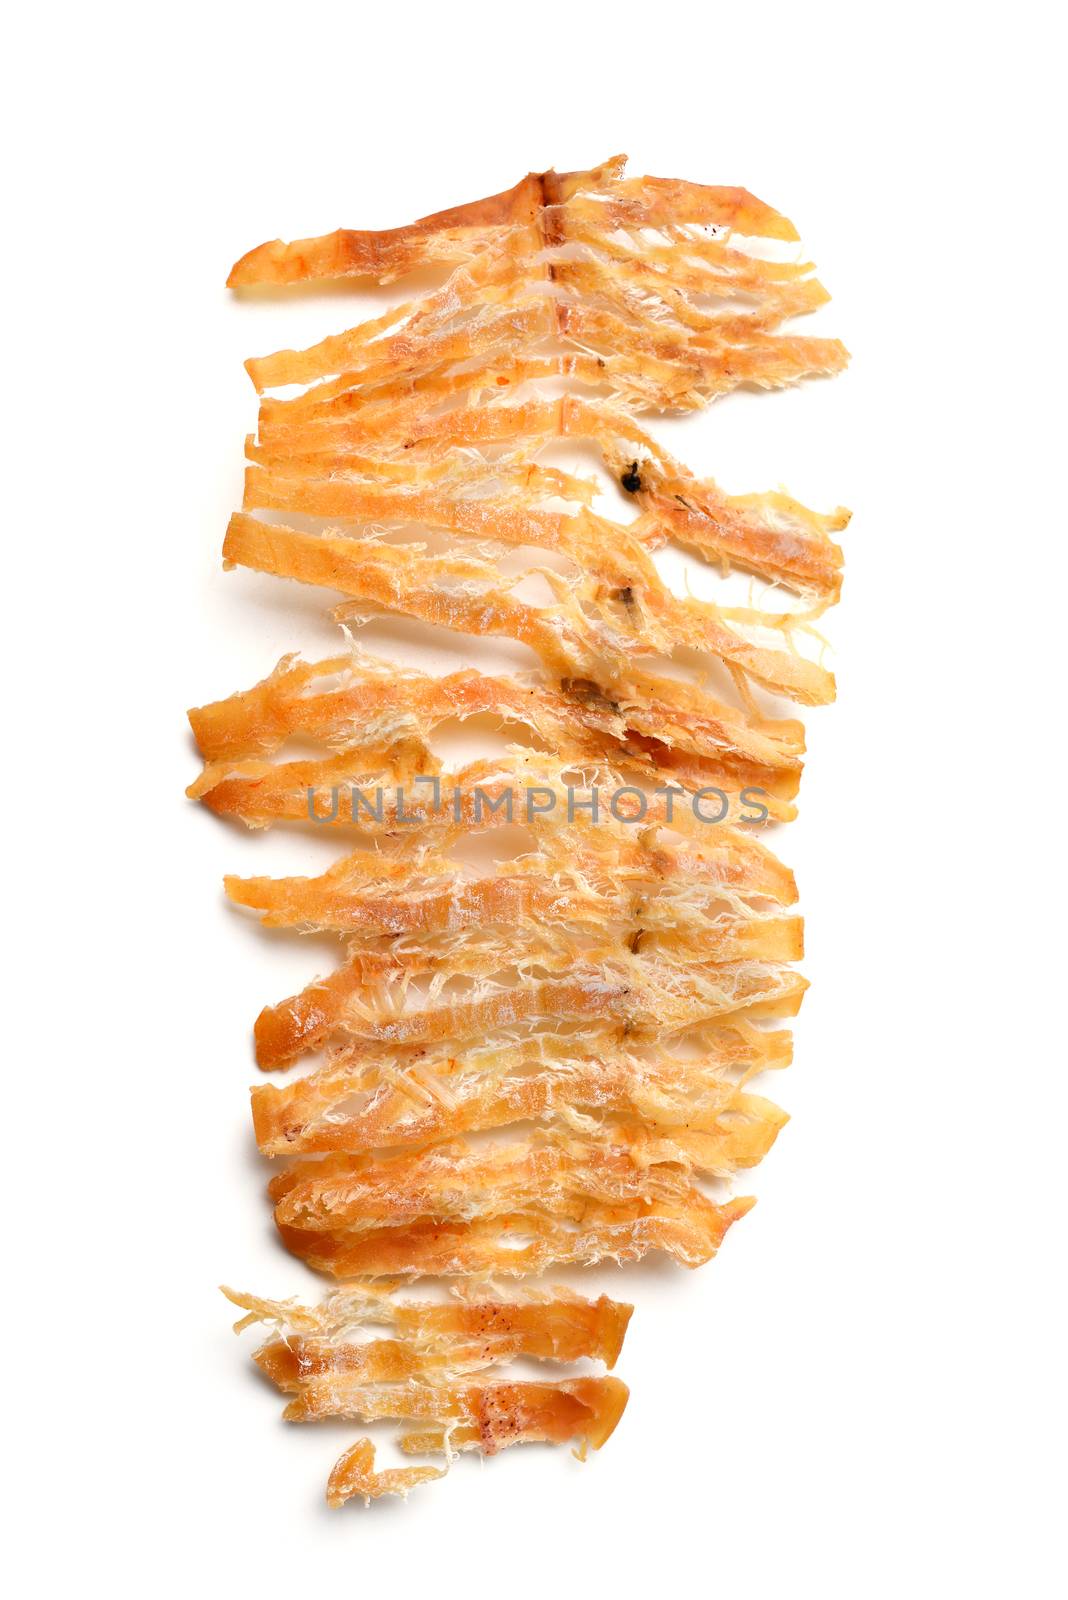 grilled dried squid by antpkr